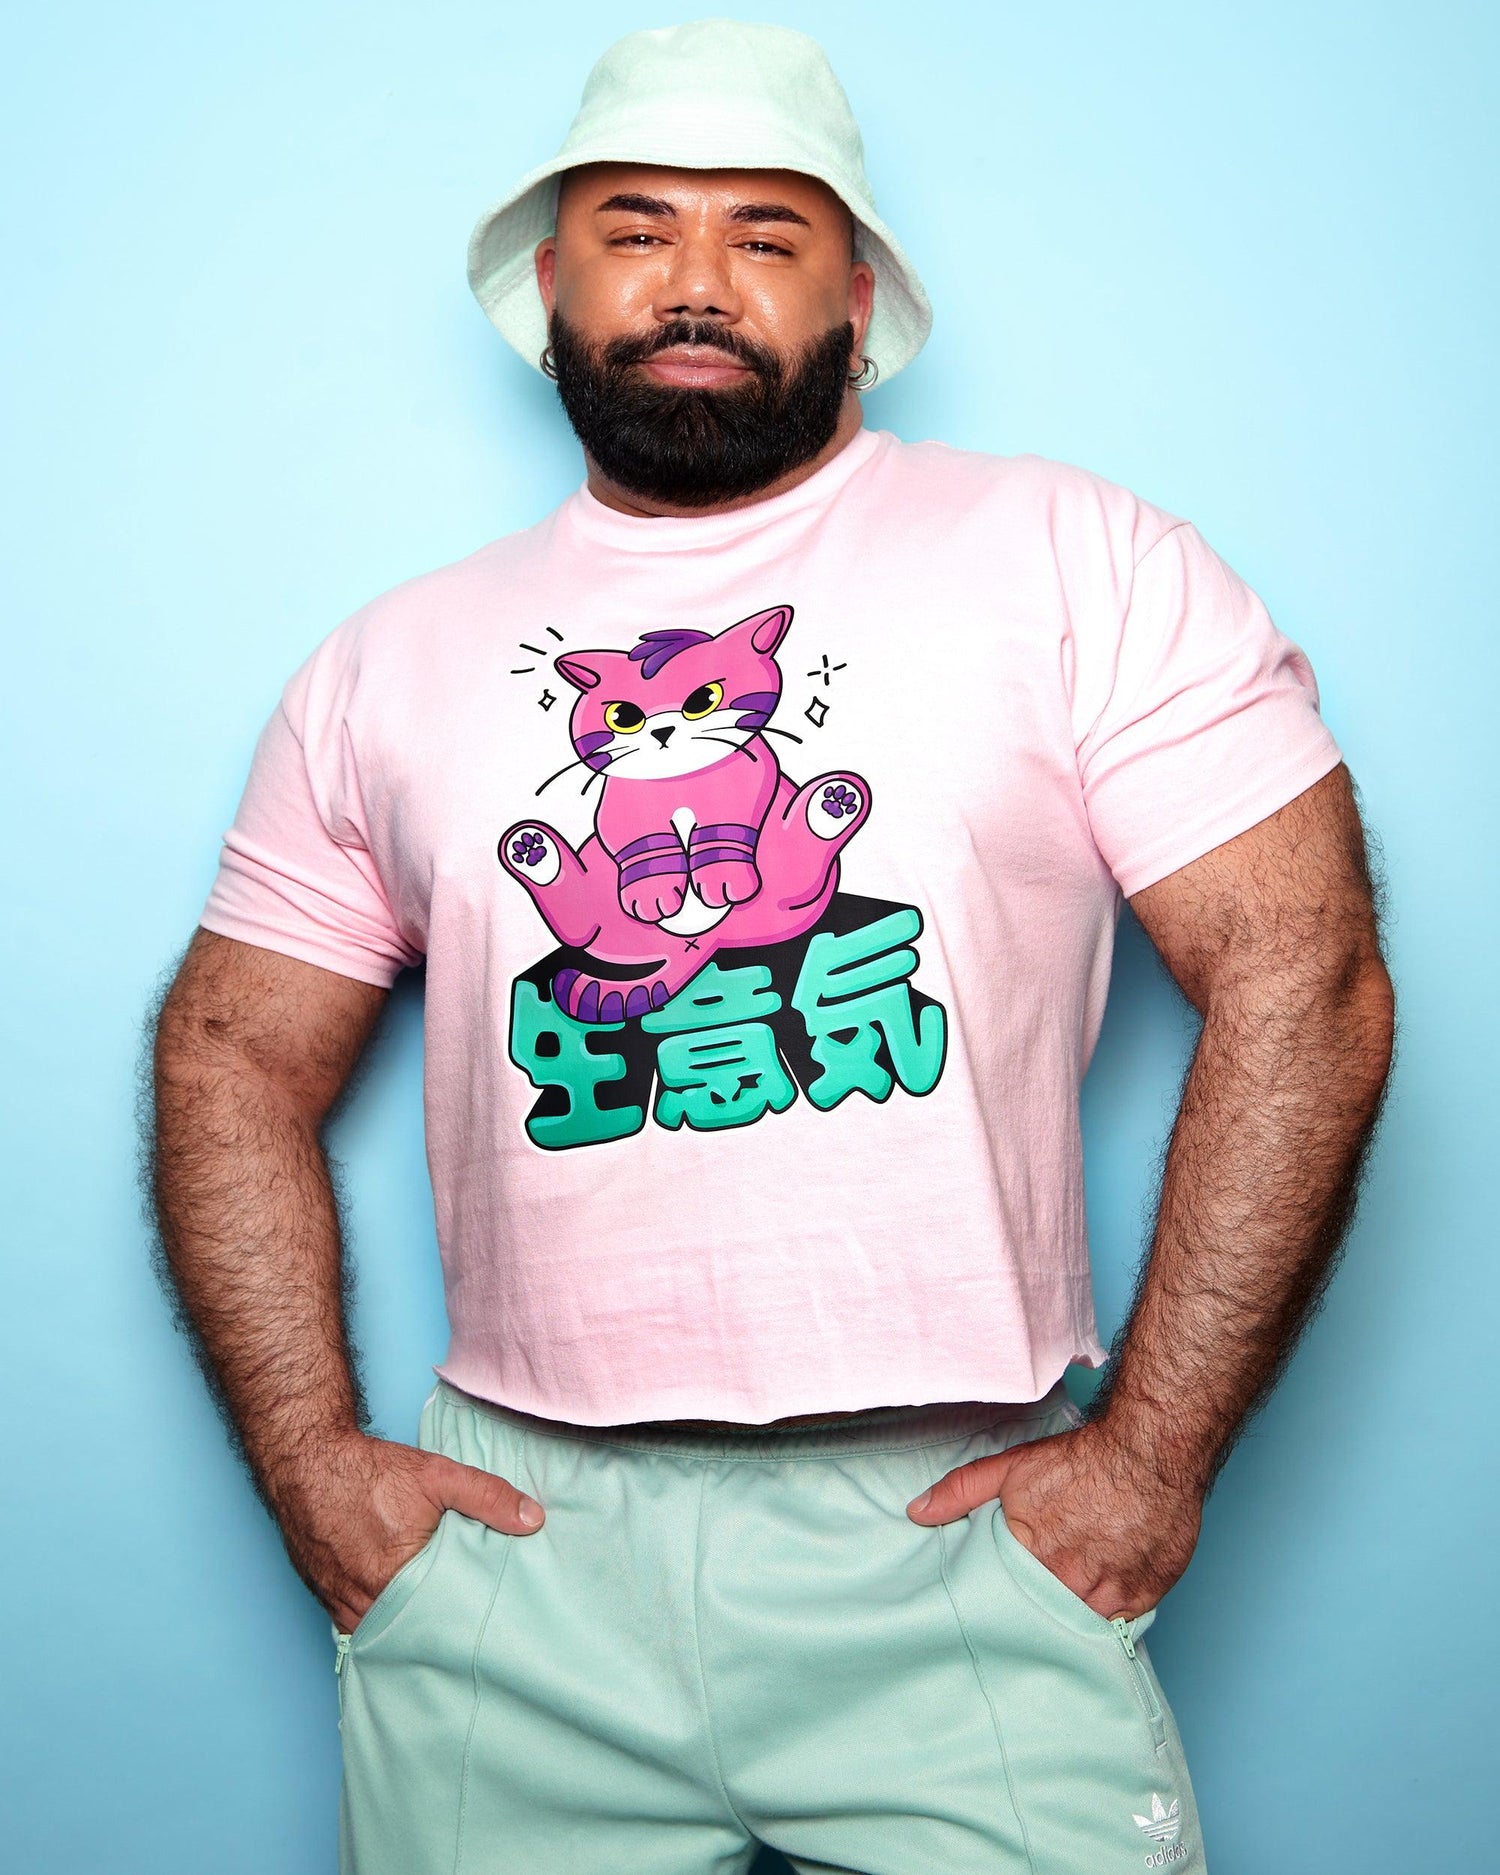 Tofu the sassy cat on pink - mens cropped tee / crop top - HOMOLONDON